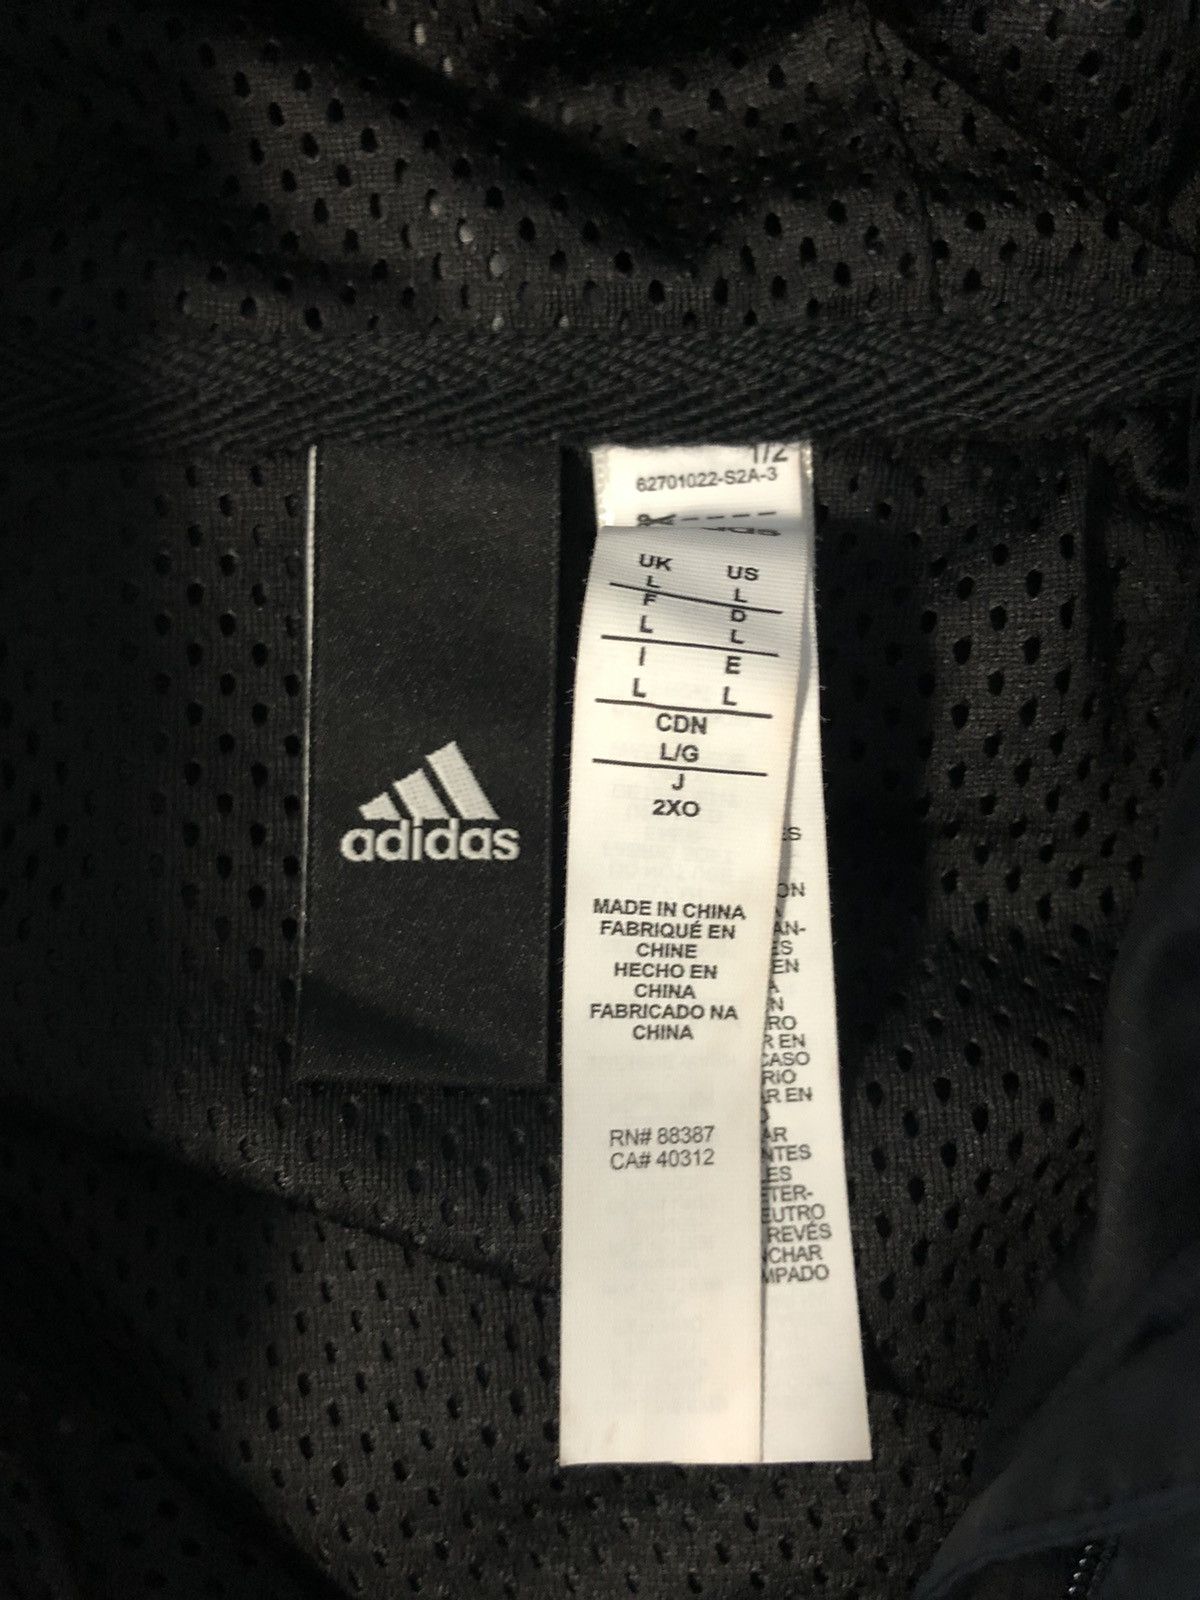 Adidas Adidas woven shell jacket Size US L / EU 52-54 / 3 - 4 Preview